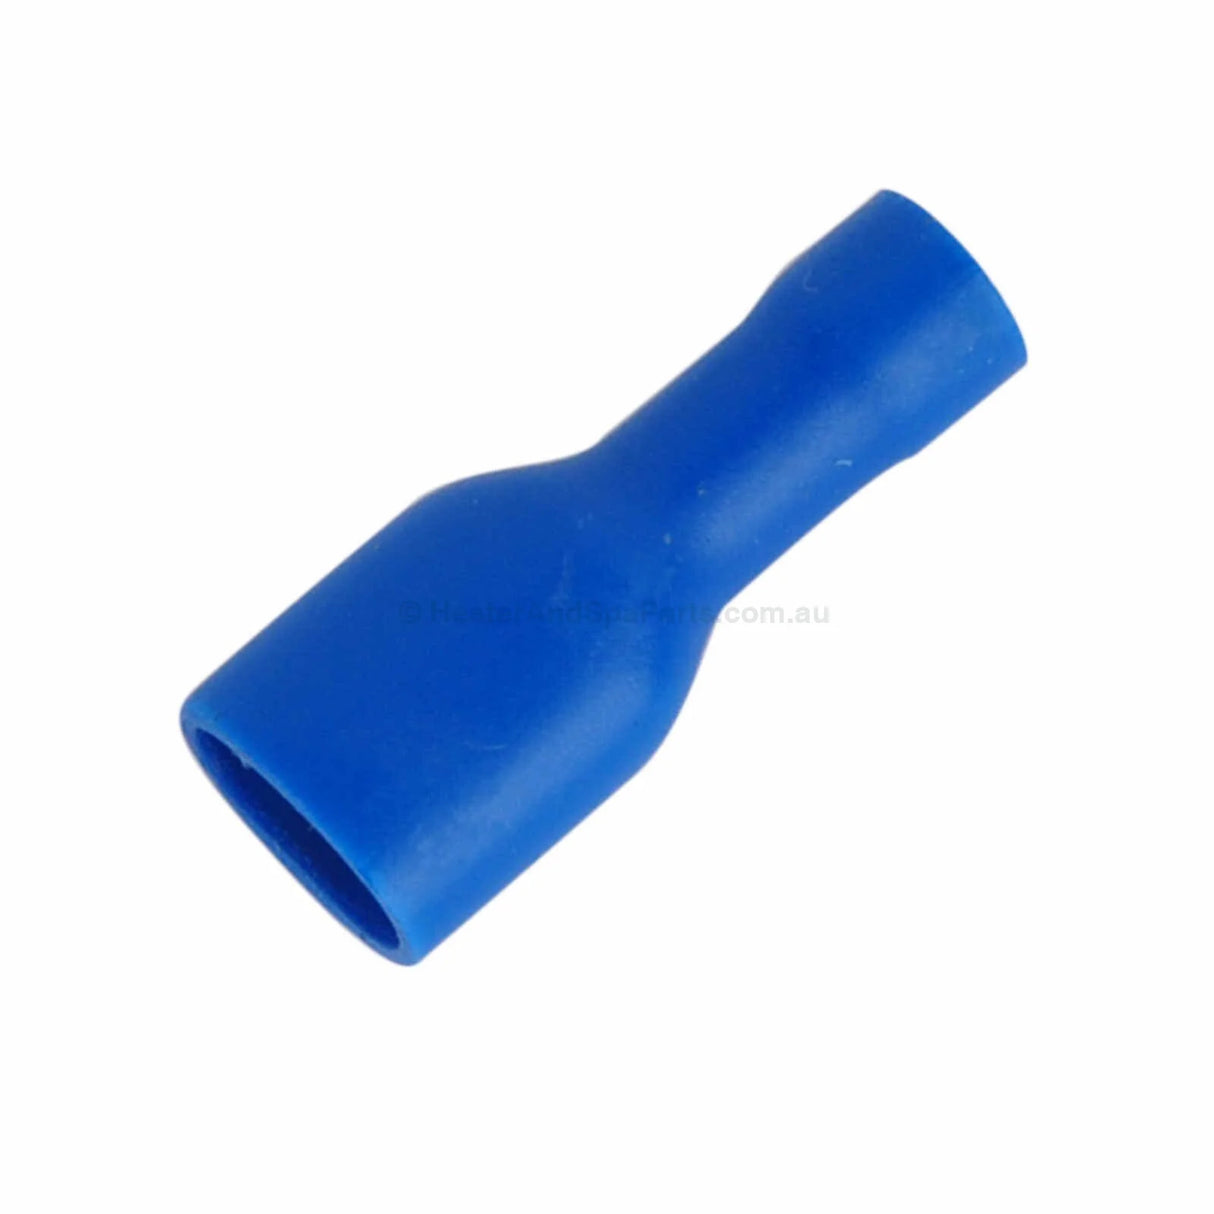 Blue Spade Terminal Connector - 6.3mm 1/4" - Insulated Crimp Style - Heater and Spa Parts